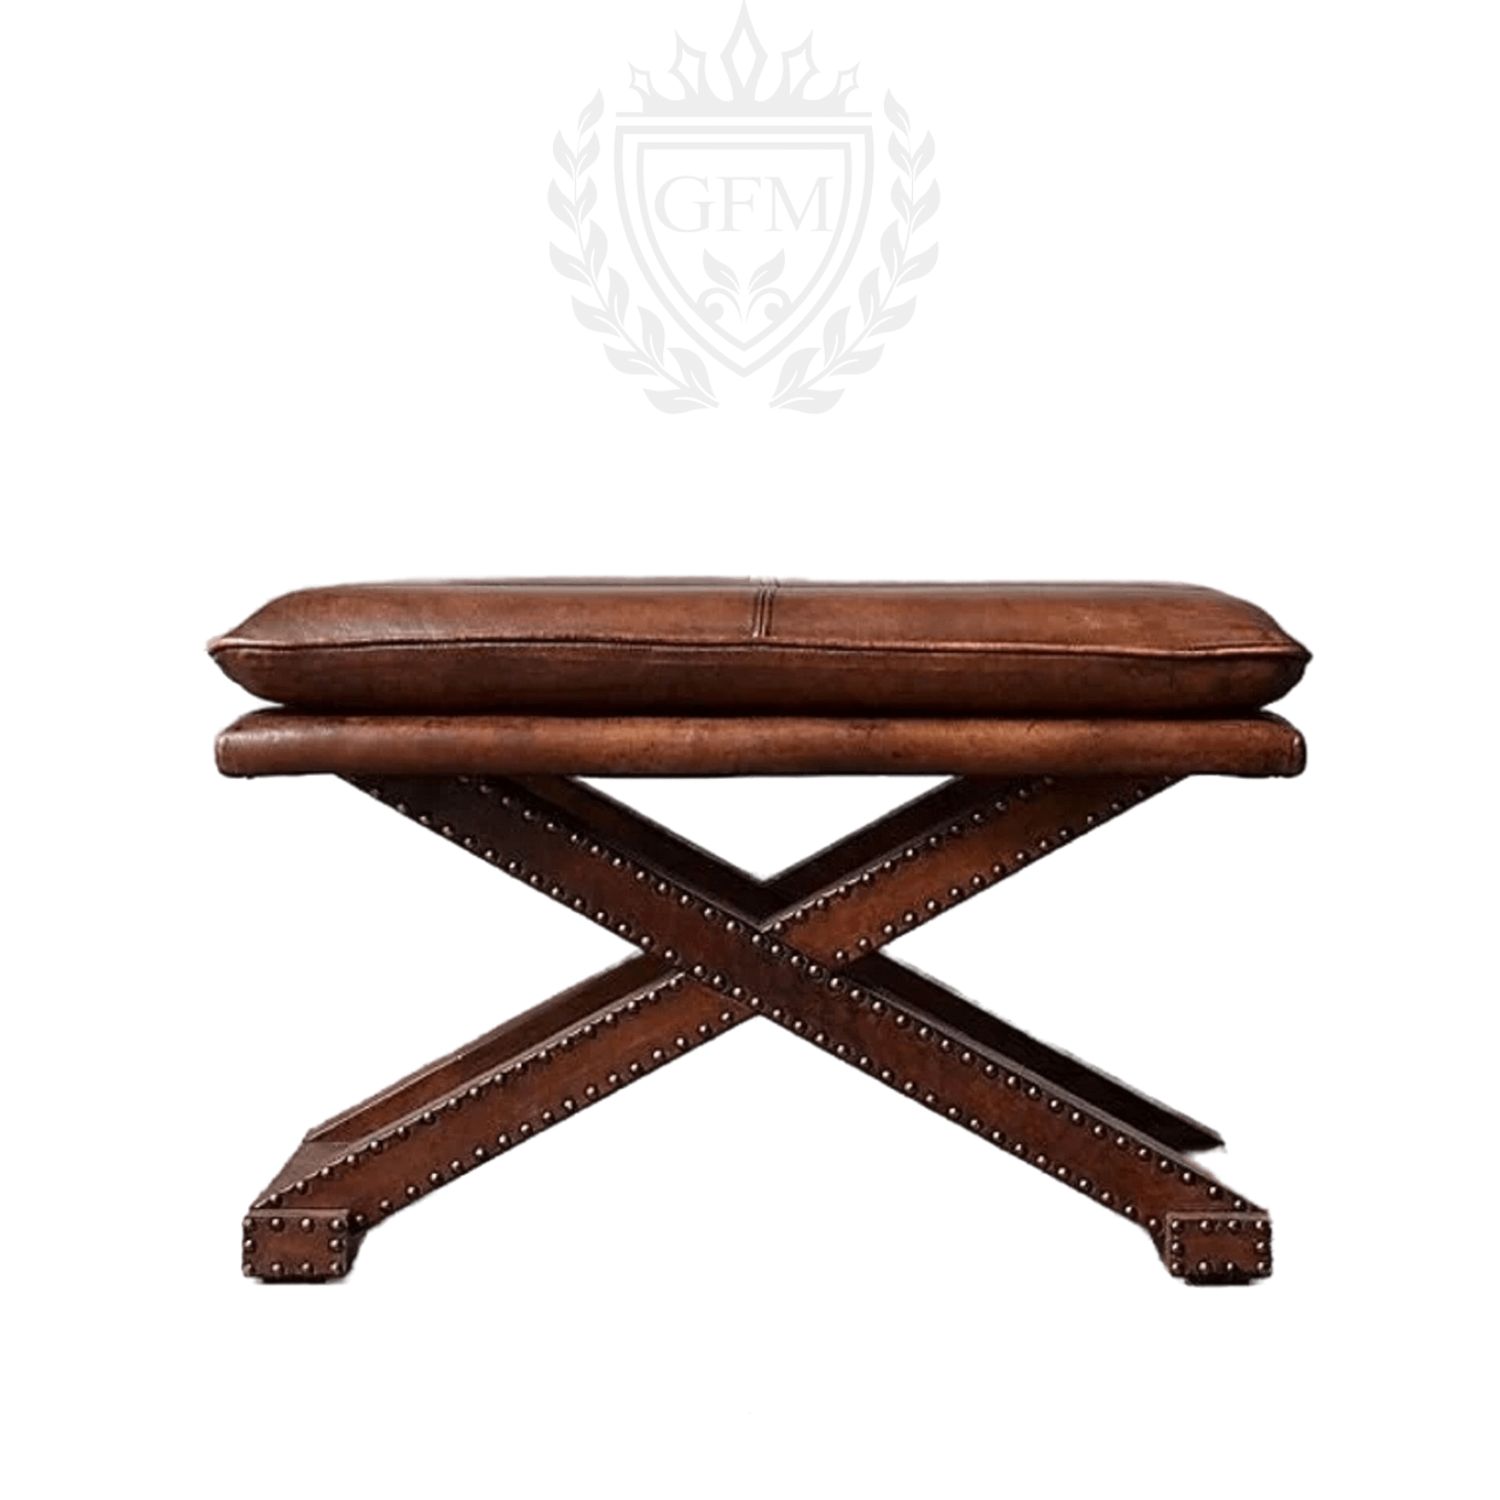 Leather Stool with Wood Frame, Amazing Quality